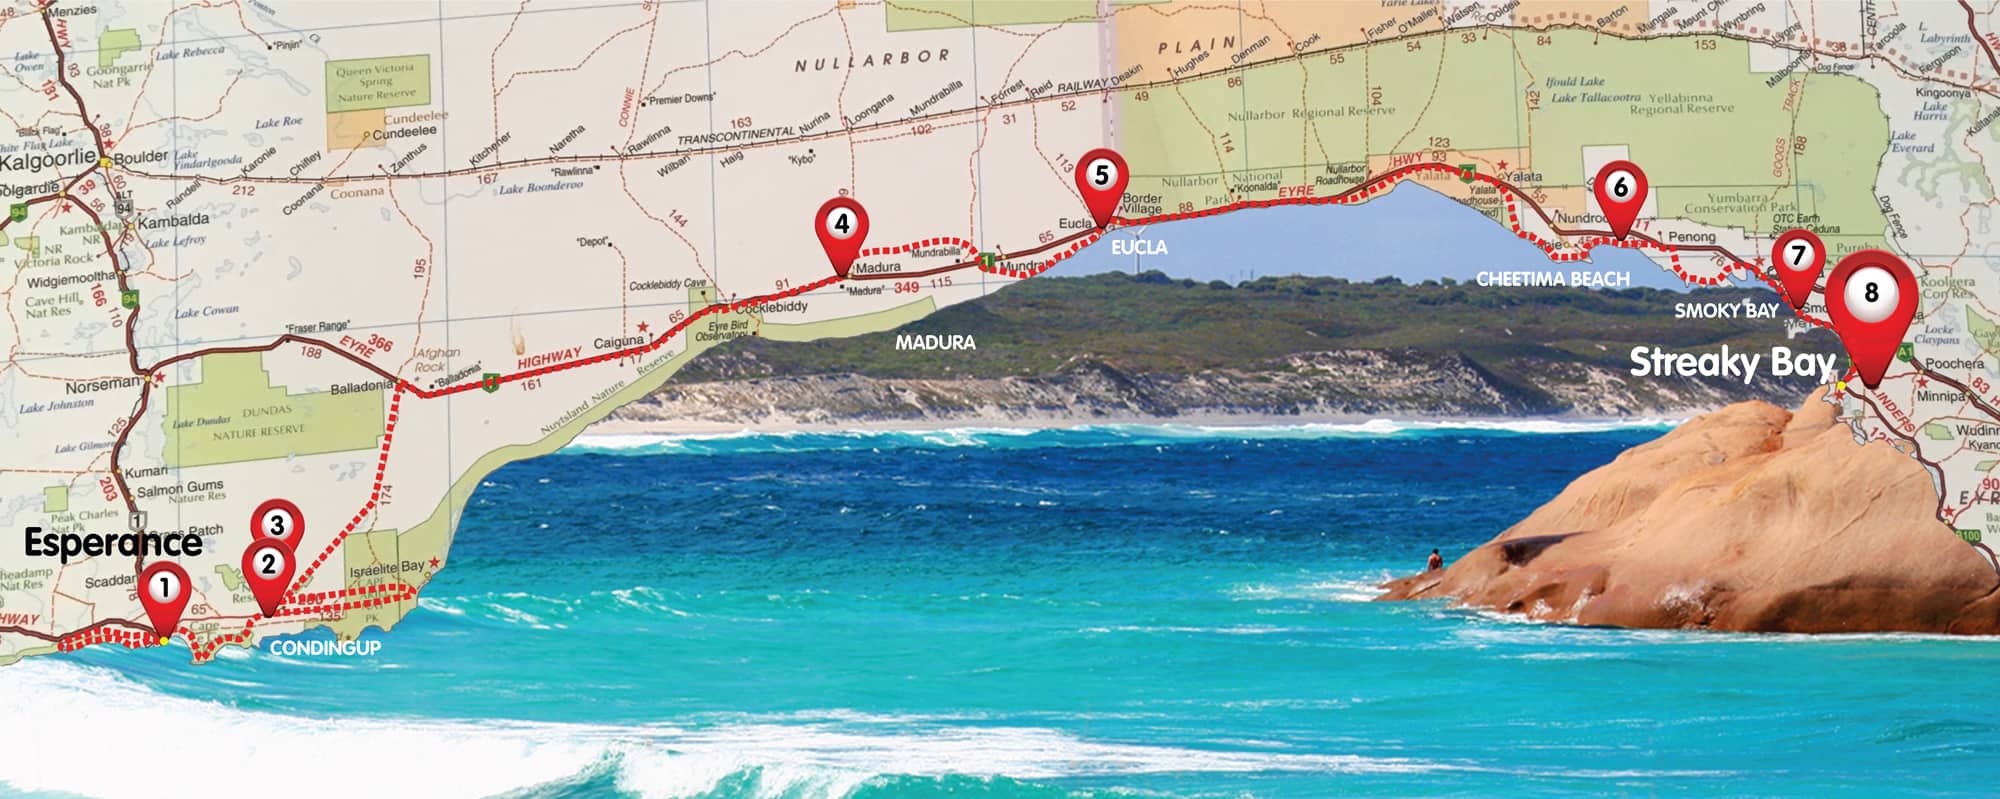 The route has been updated for the Variety SA 4WD Challenge (2018)